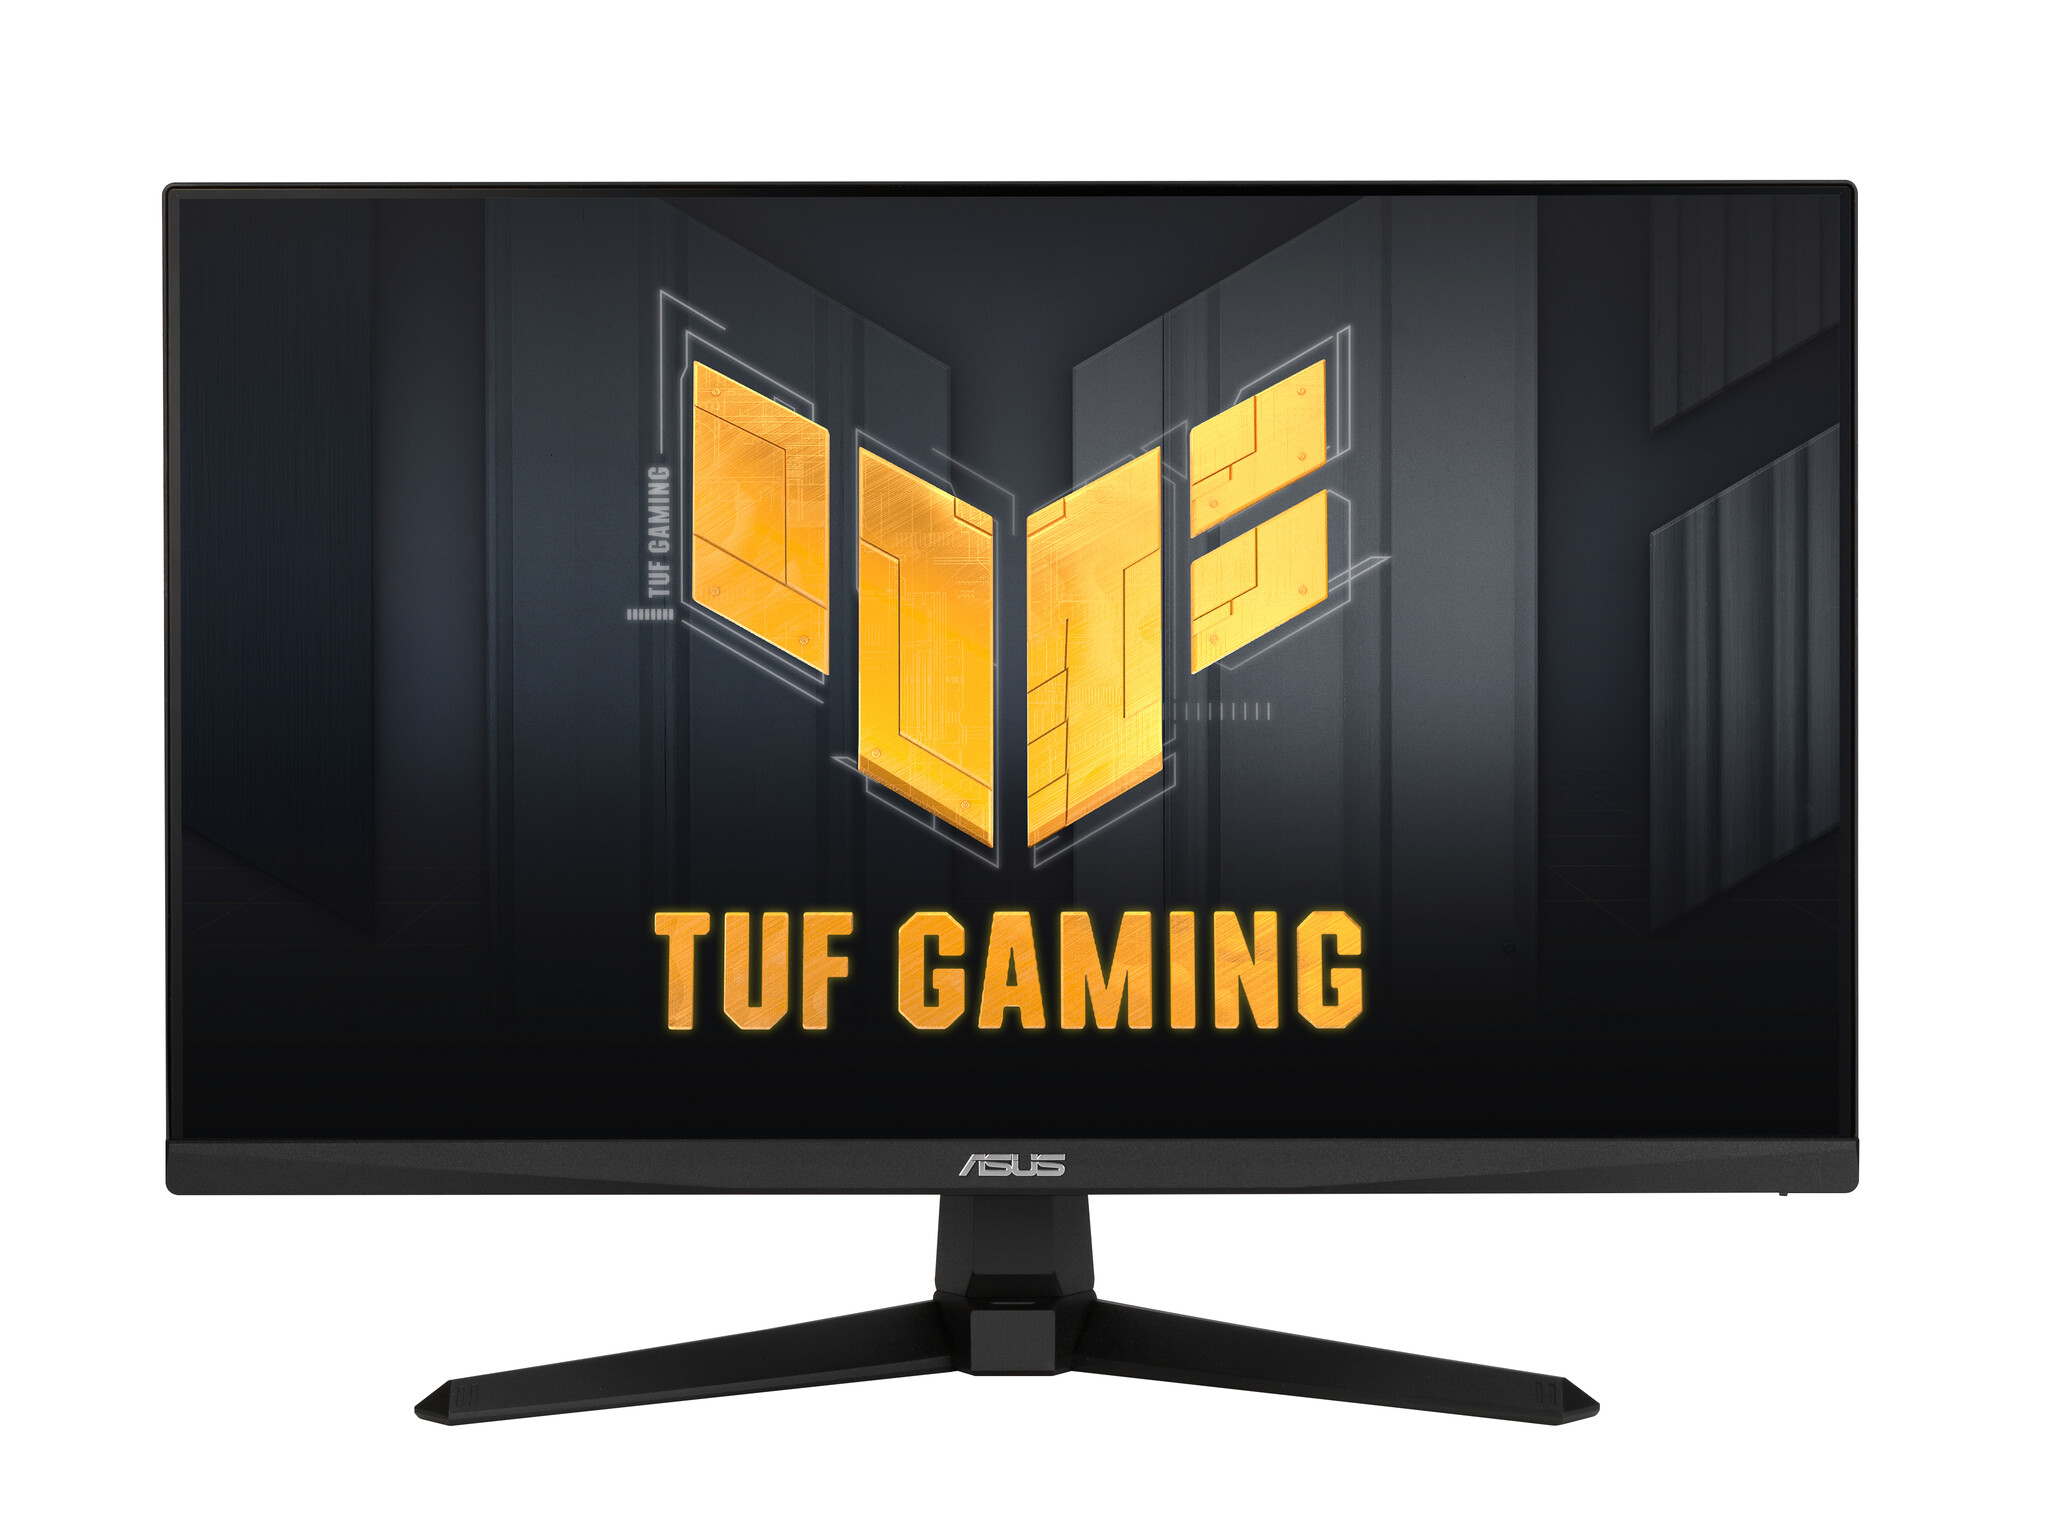 ASUS TUF Gaming VG249QM1A 23.8″ Full HD 270Hz Gaming Monitor with AMD FreeSync with NVidia G-Sync – Black #366918